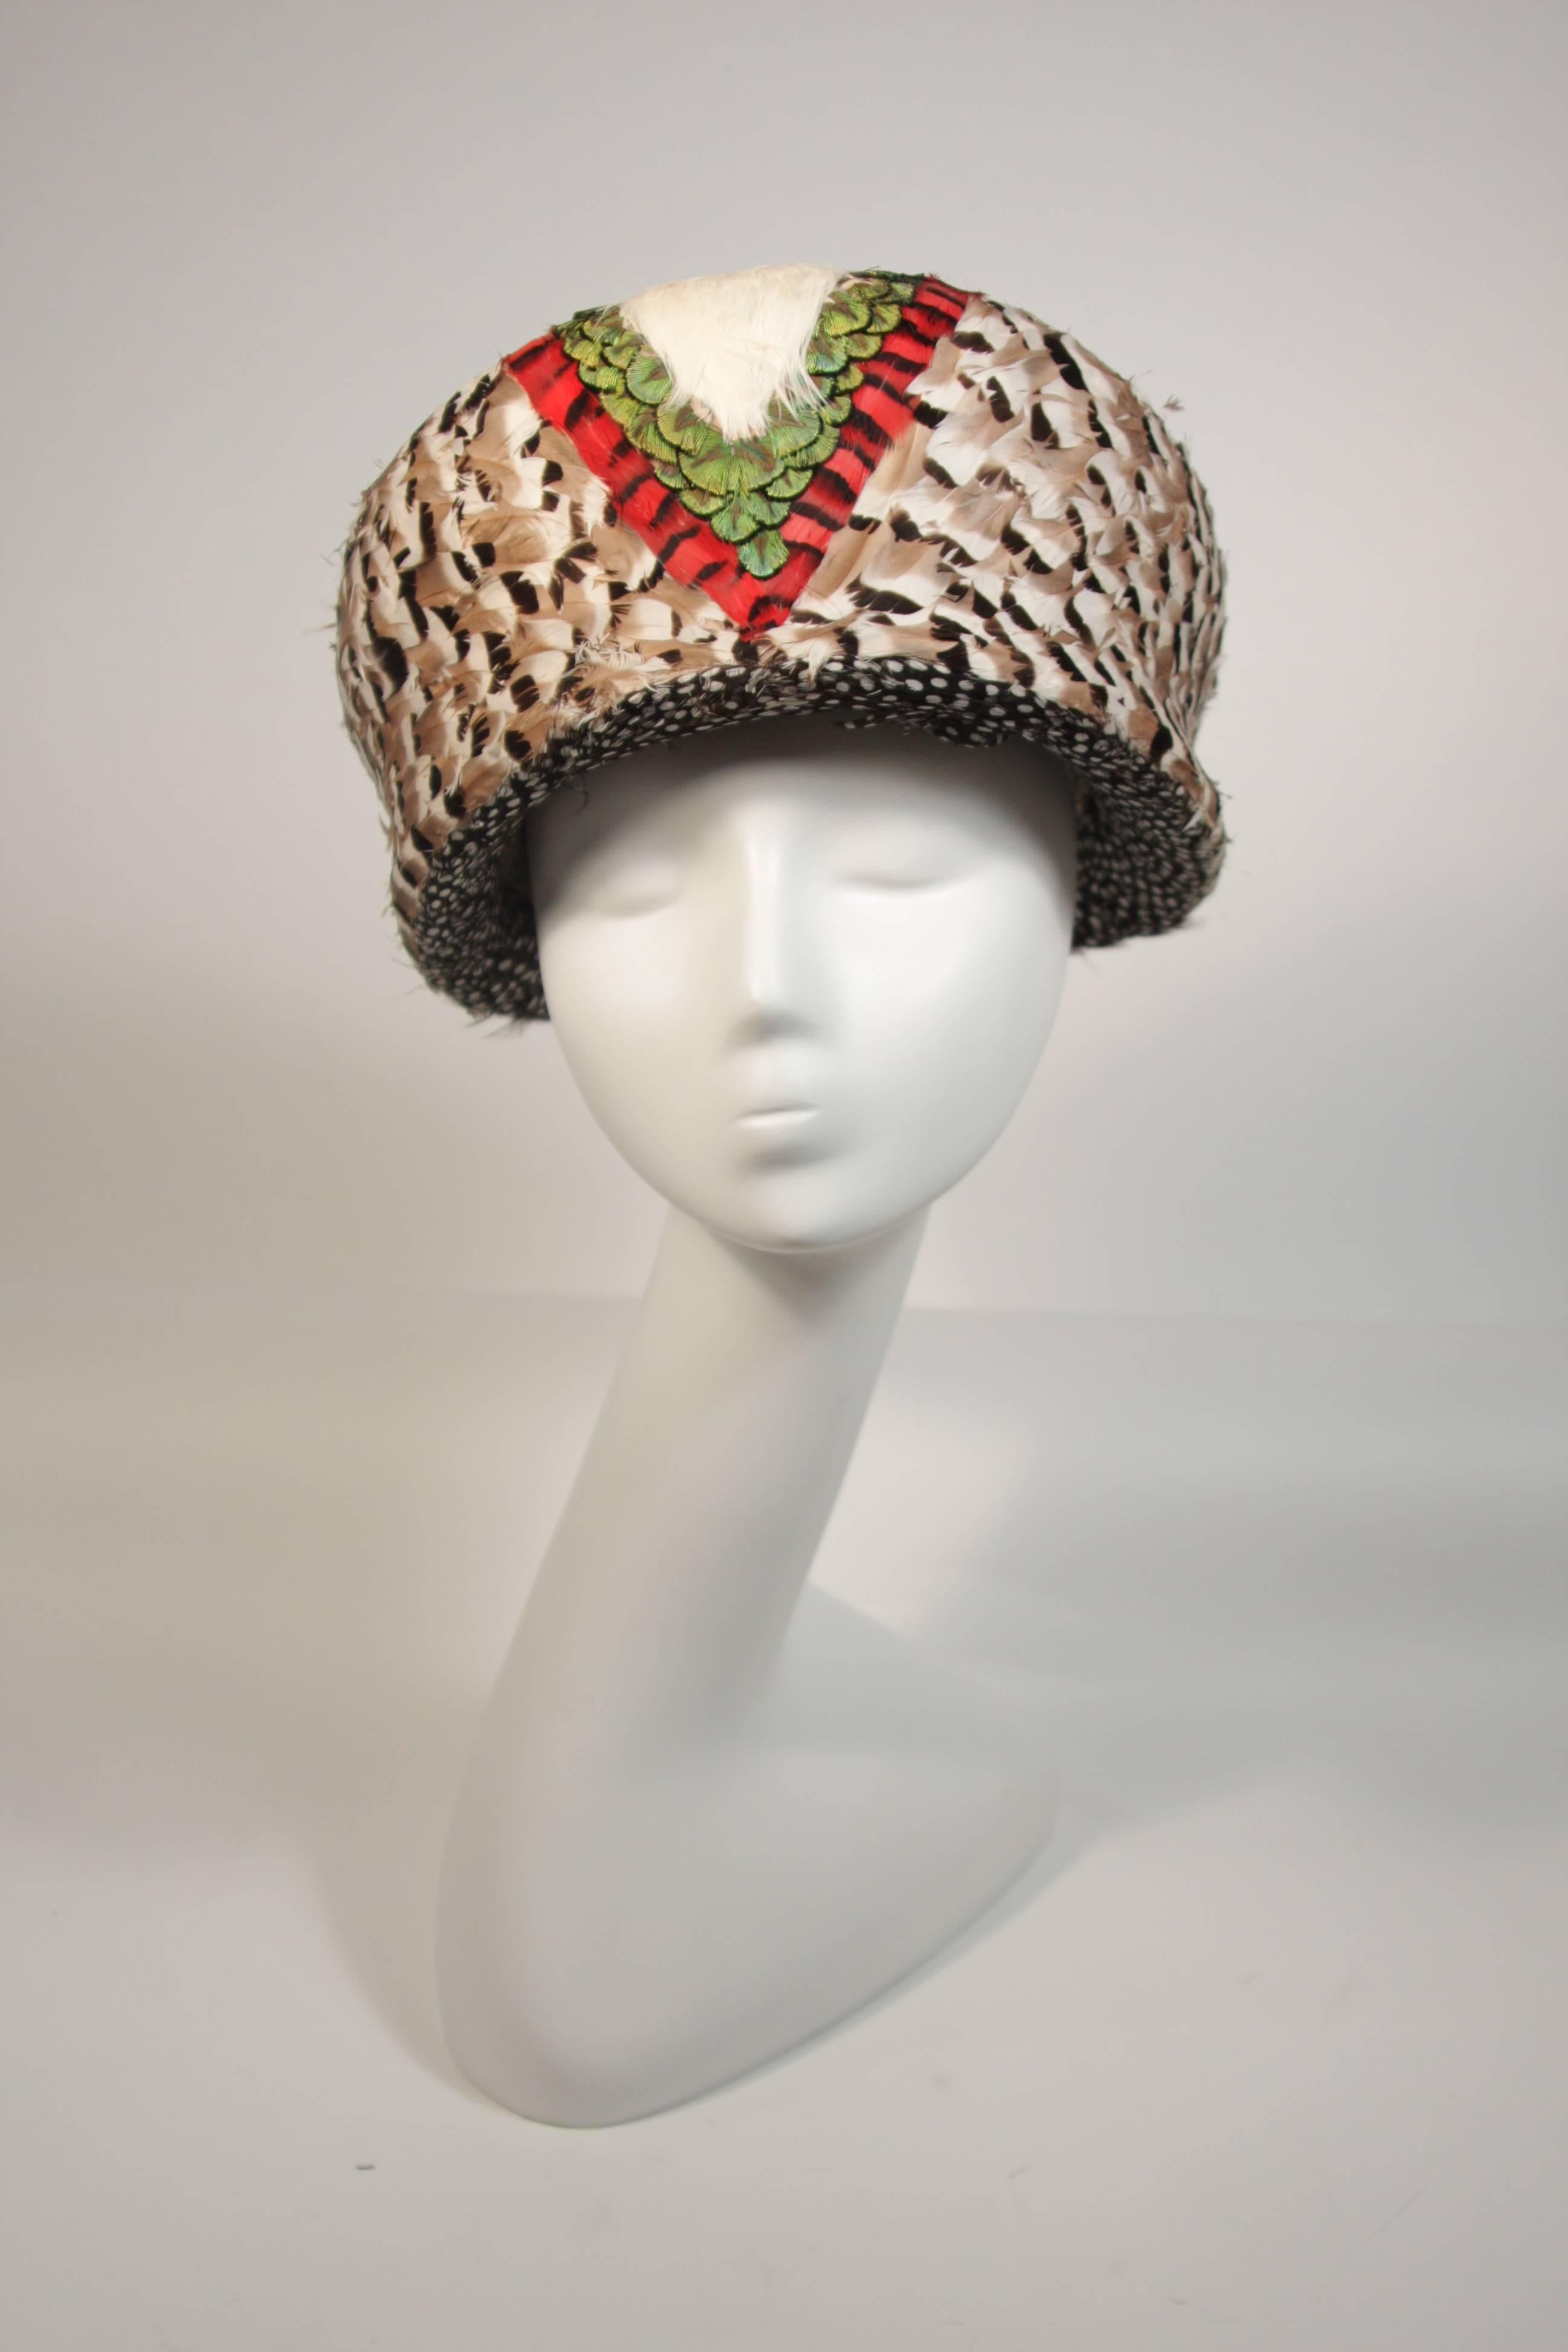 This Jack McConnell hat is composed of feathers in a geometric design and features a boxy shape . This is an absolutely stellar hat in excellent condition. A fantastic design. Made in USA.

**Please cross-reference measurements for personal